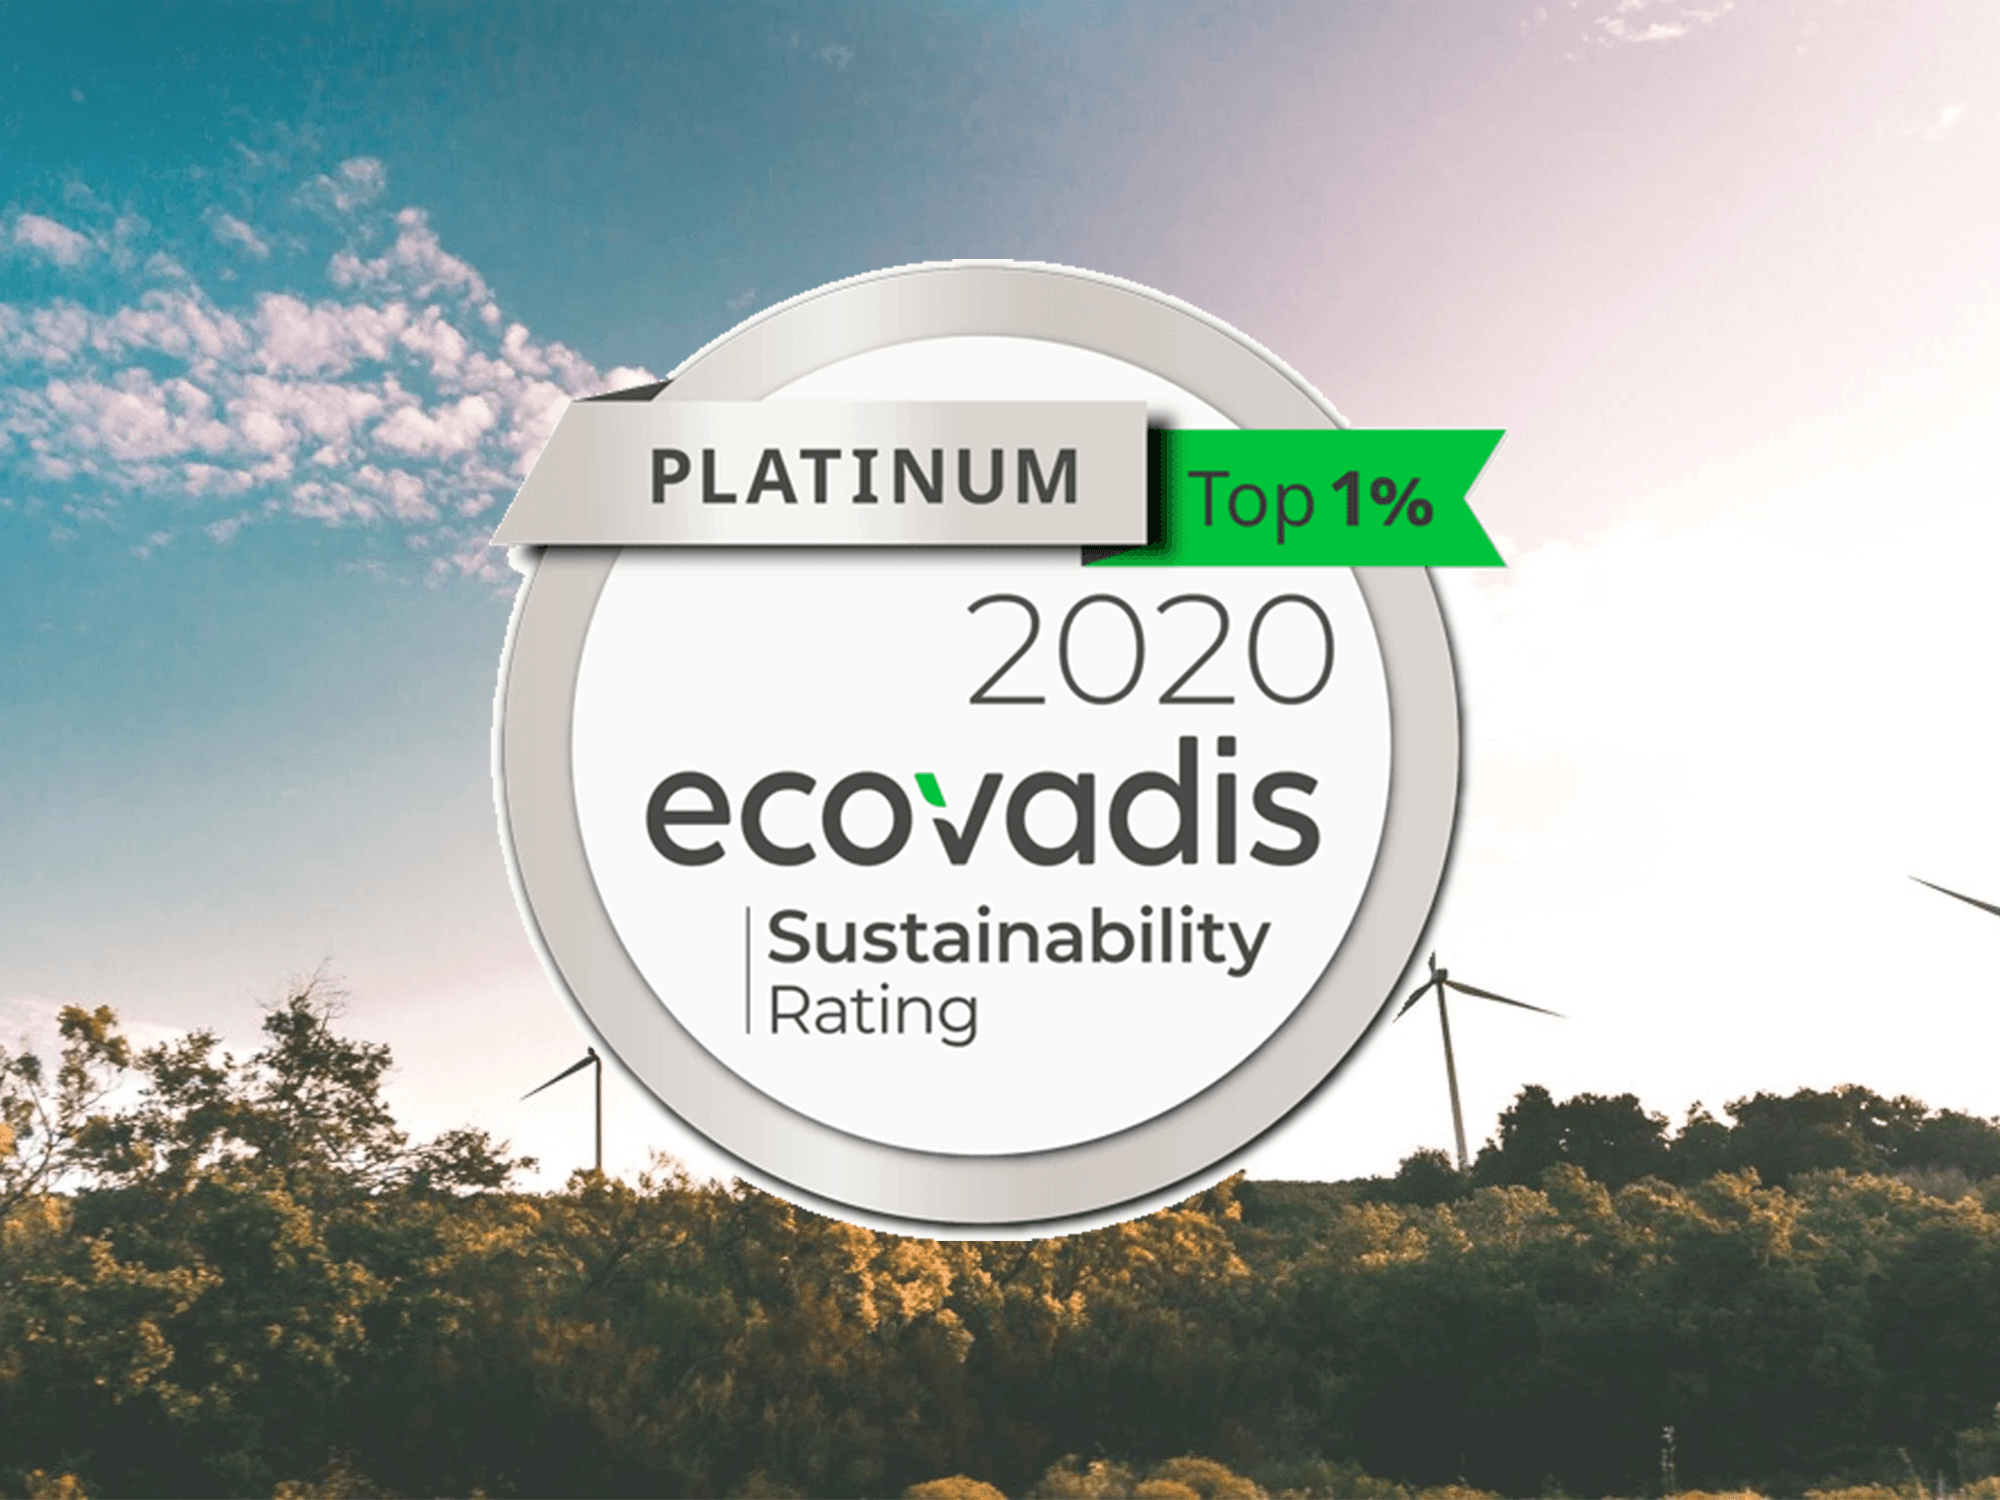 MA awarded ‘Platinum’ rating by EcoVadis for sustainability